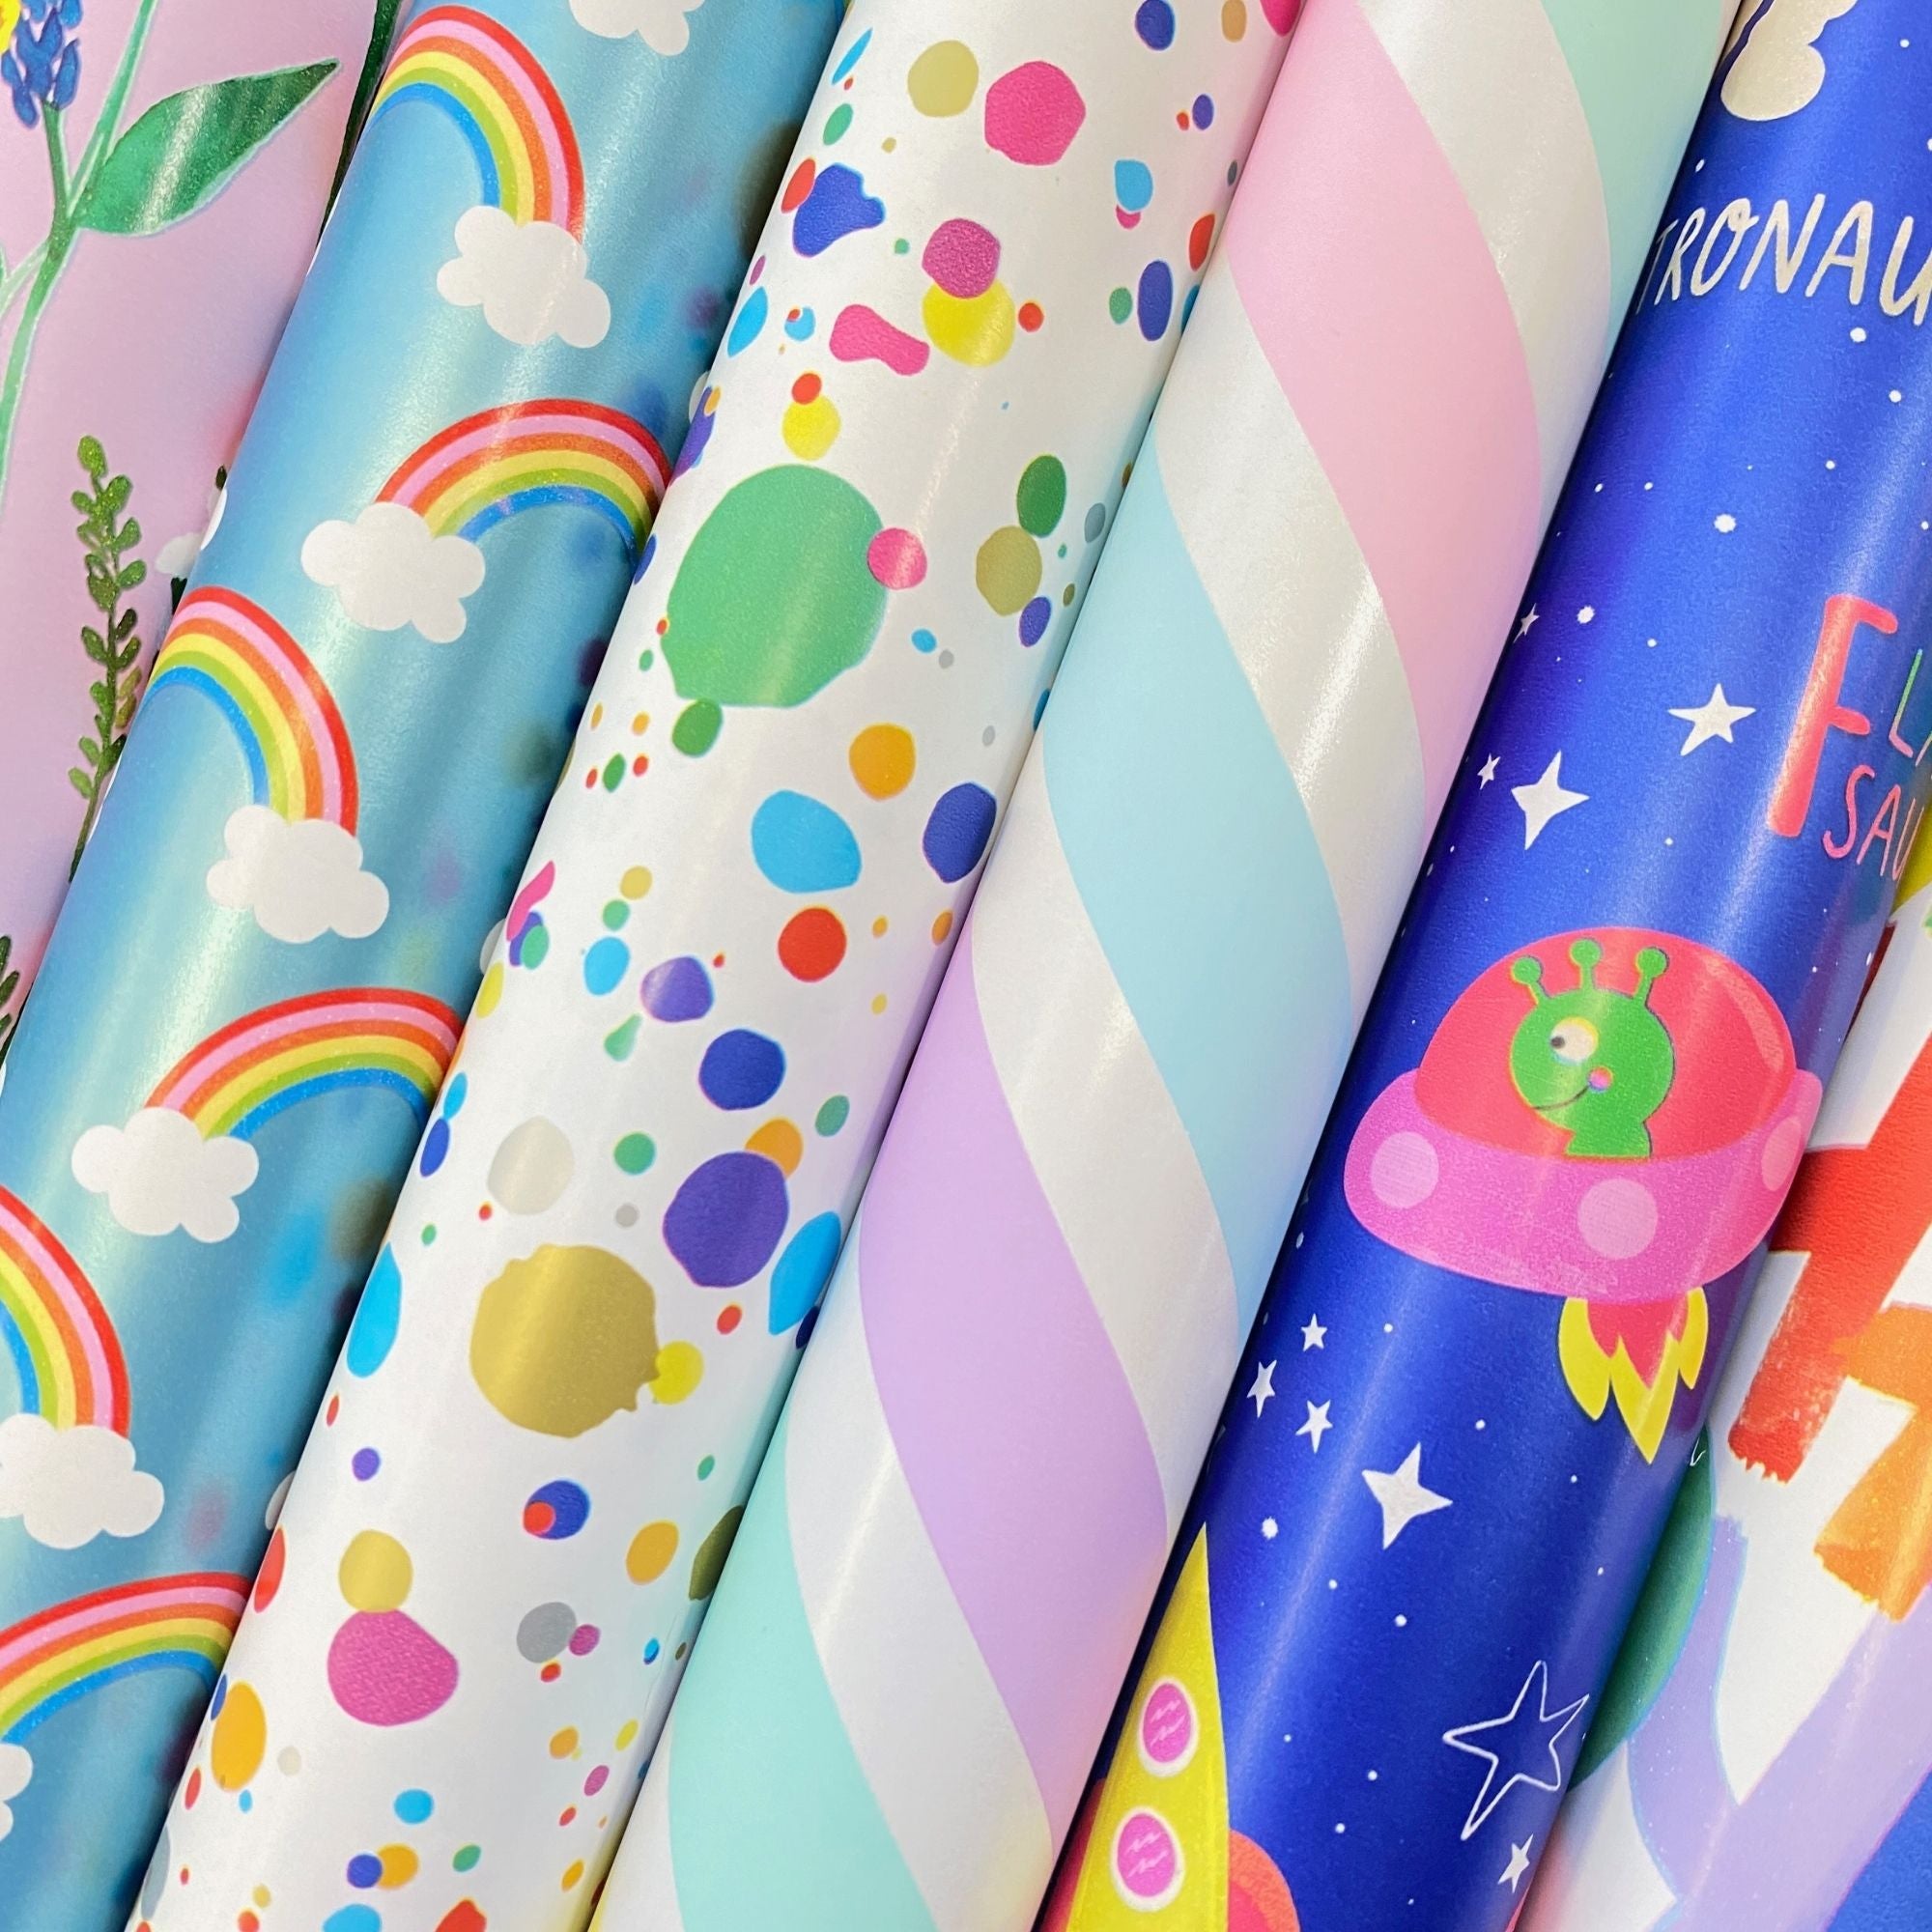 Floral Wrapping Paper Roll Bundle (12.5 sq ft per roll, 75 total